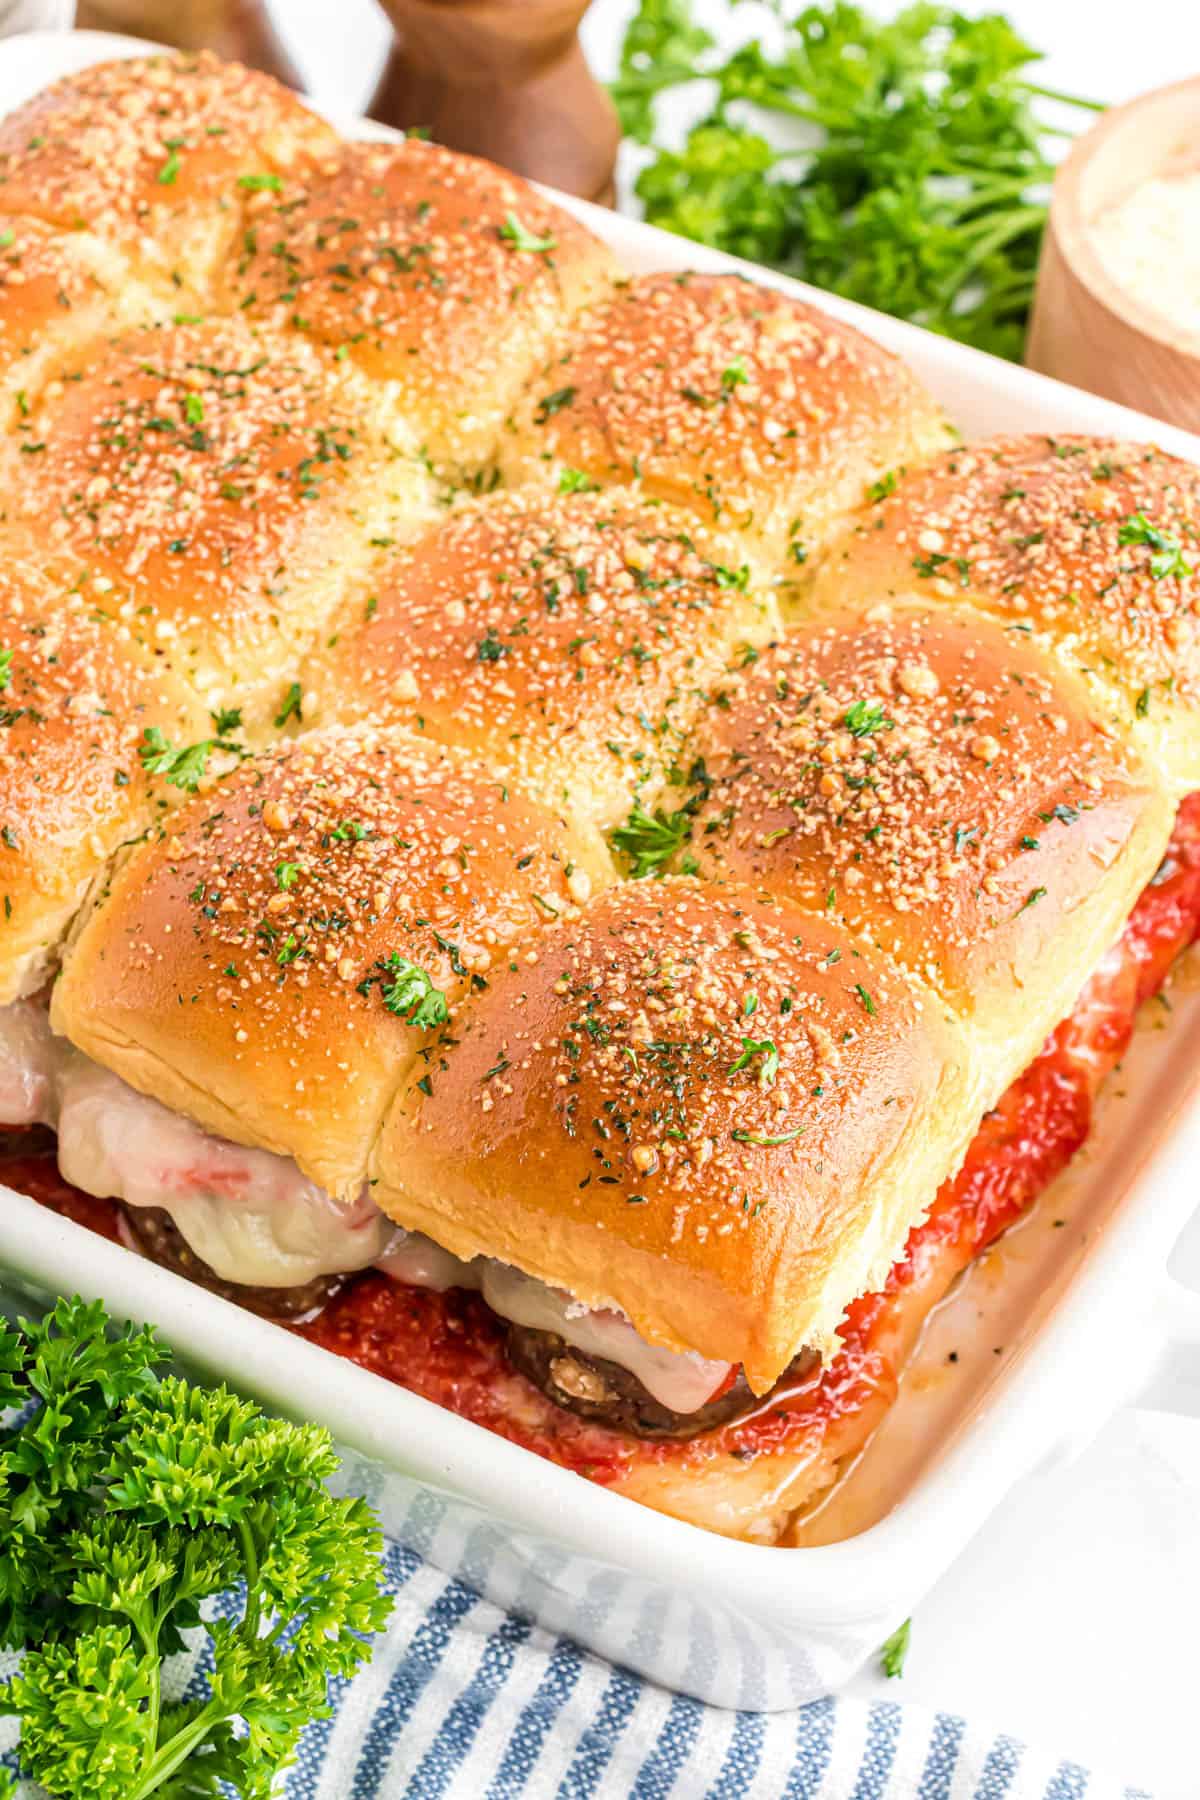 Meatball sliders in a white baking dish.